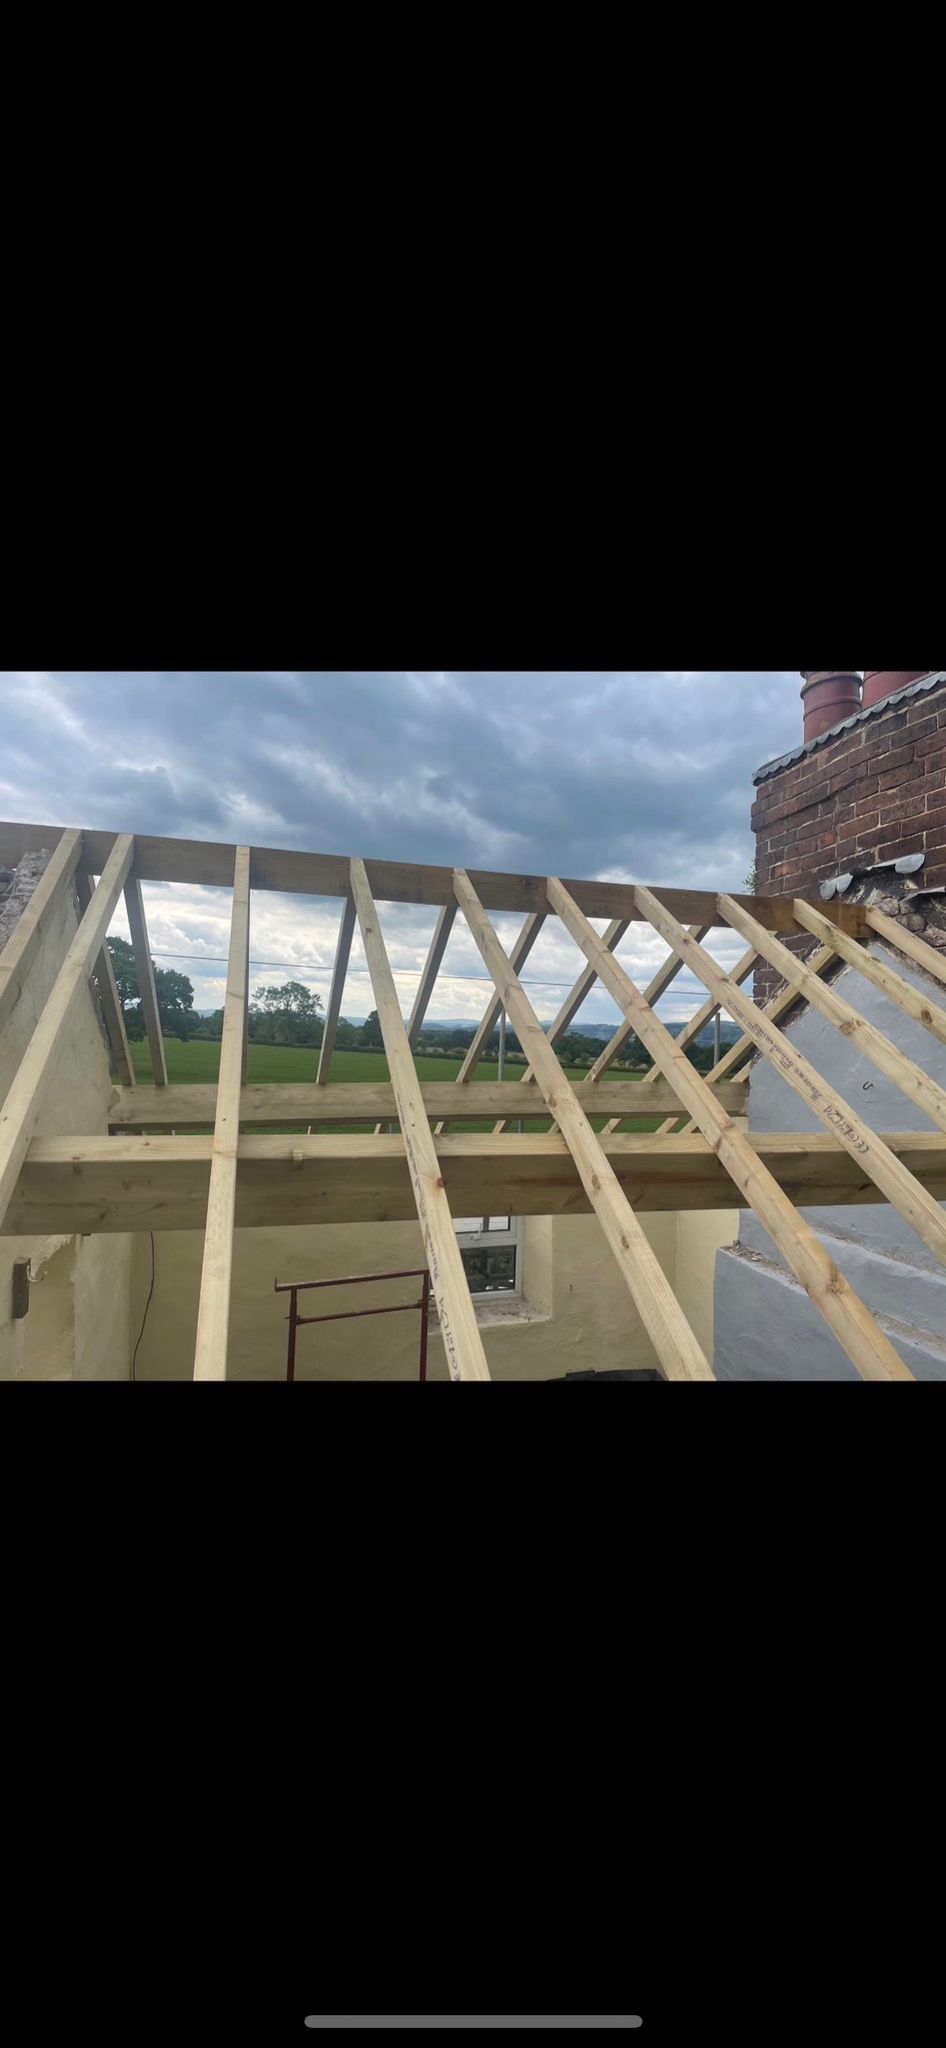 Timberwork Roof Contractors Mancot Royal, CH5 - DD Roofing